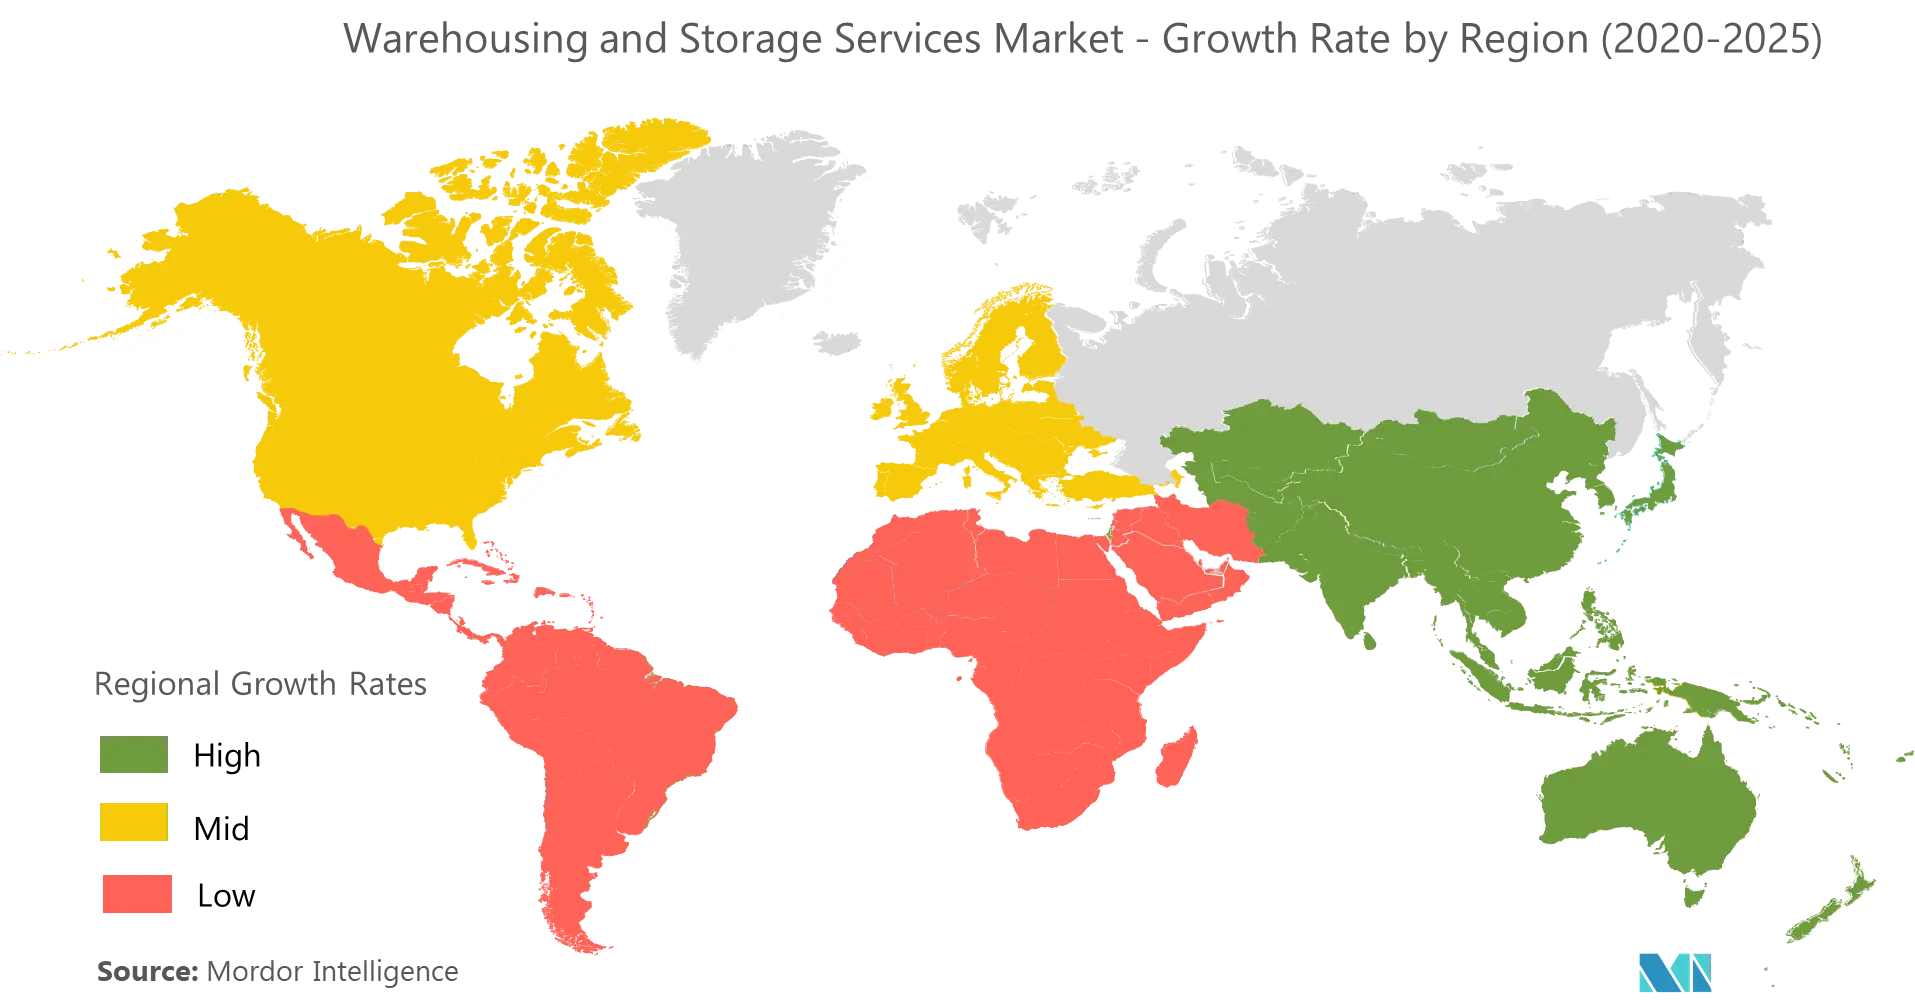 Warehousing and Storage Services Market - Growth Rate by Region (2020 - 2025)